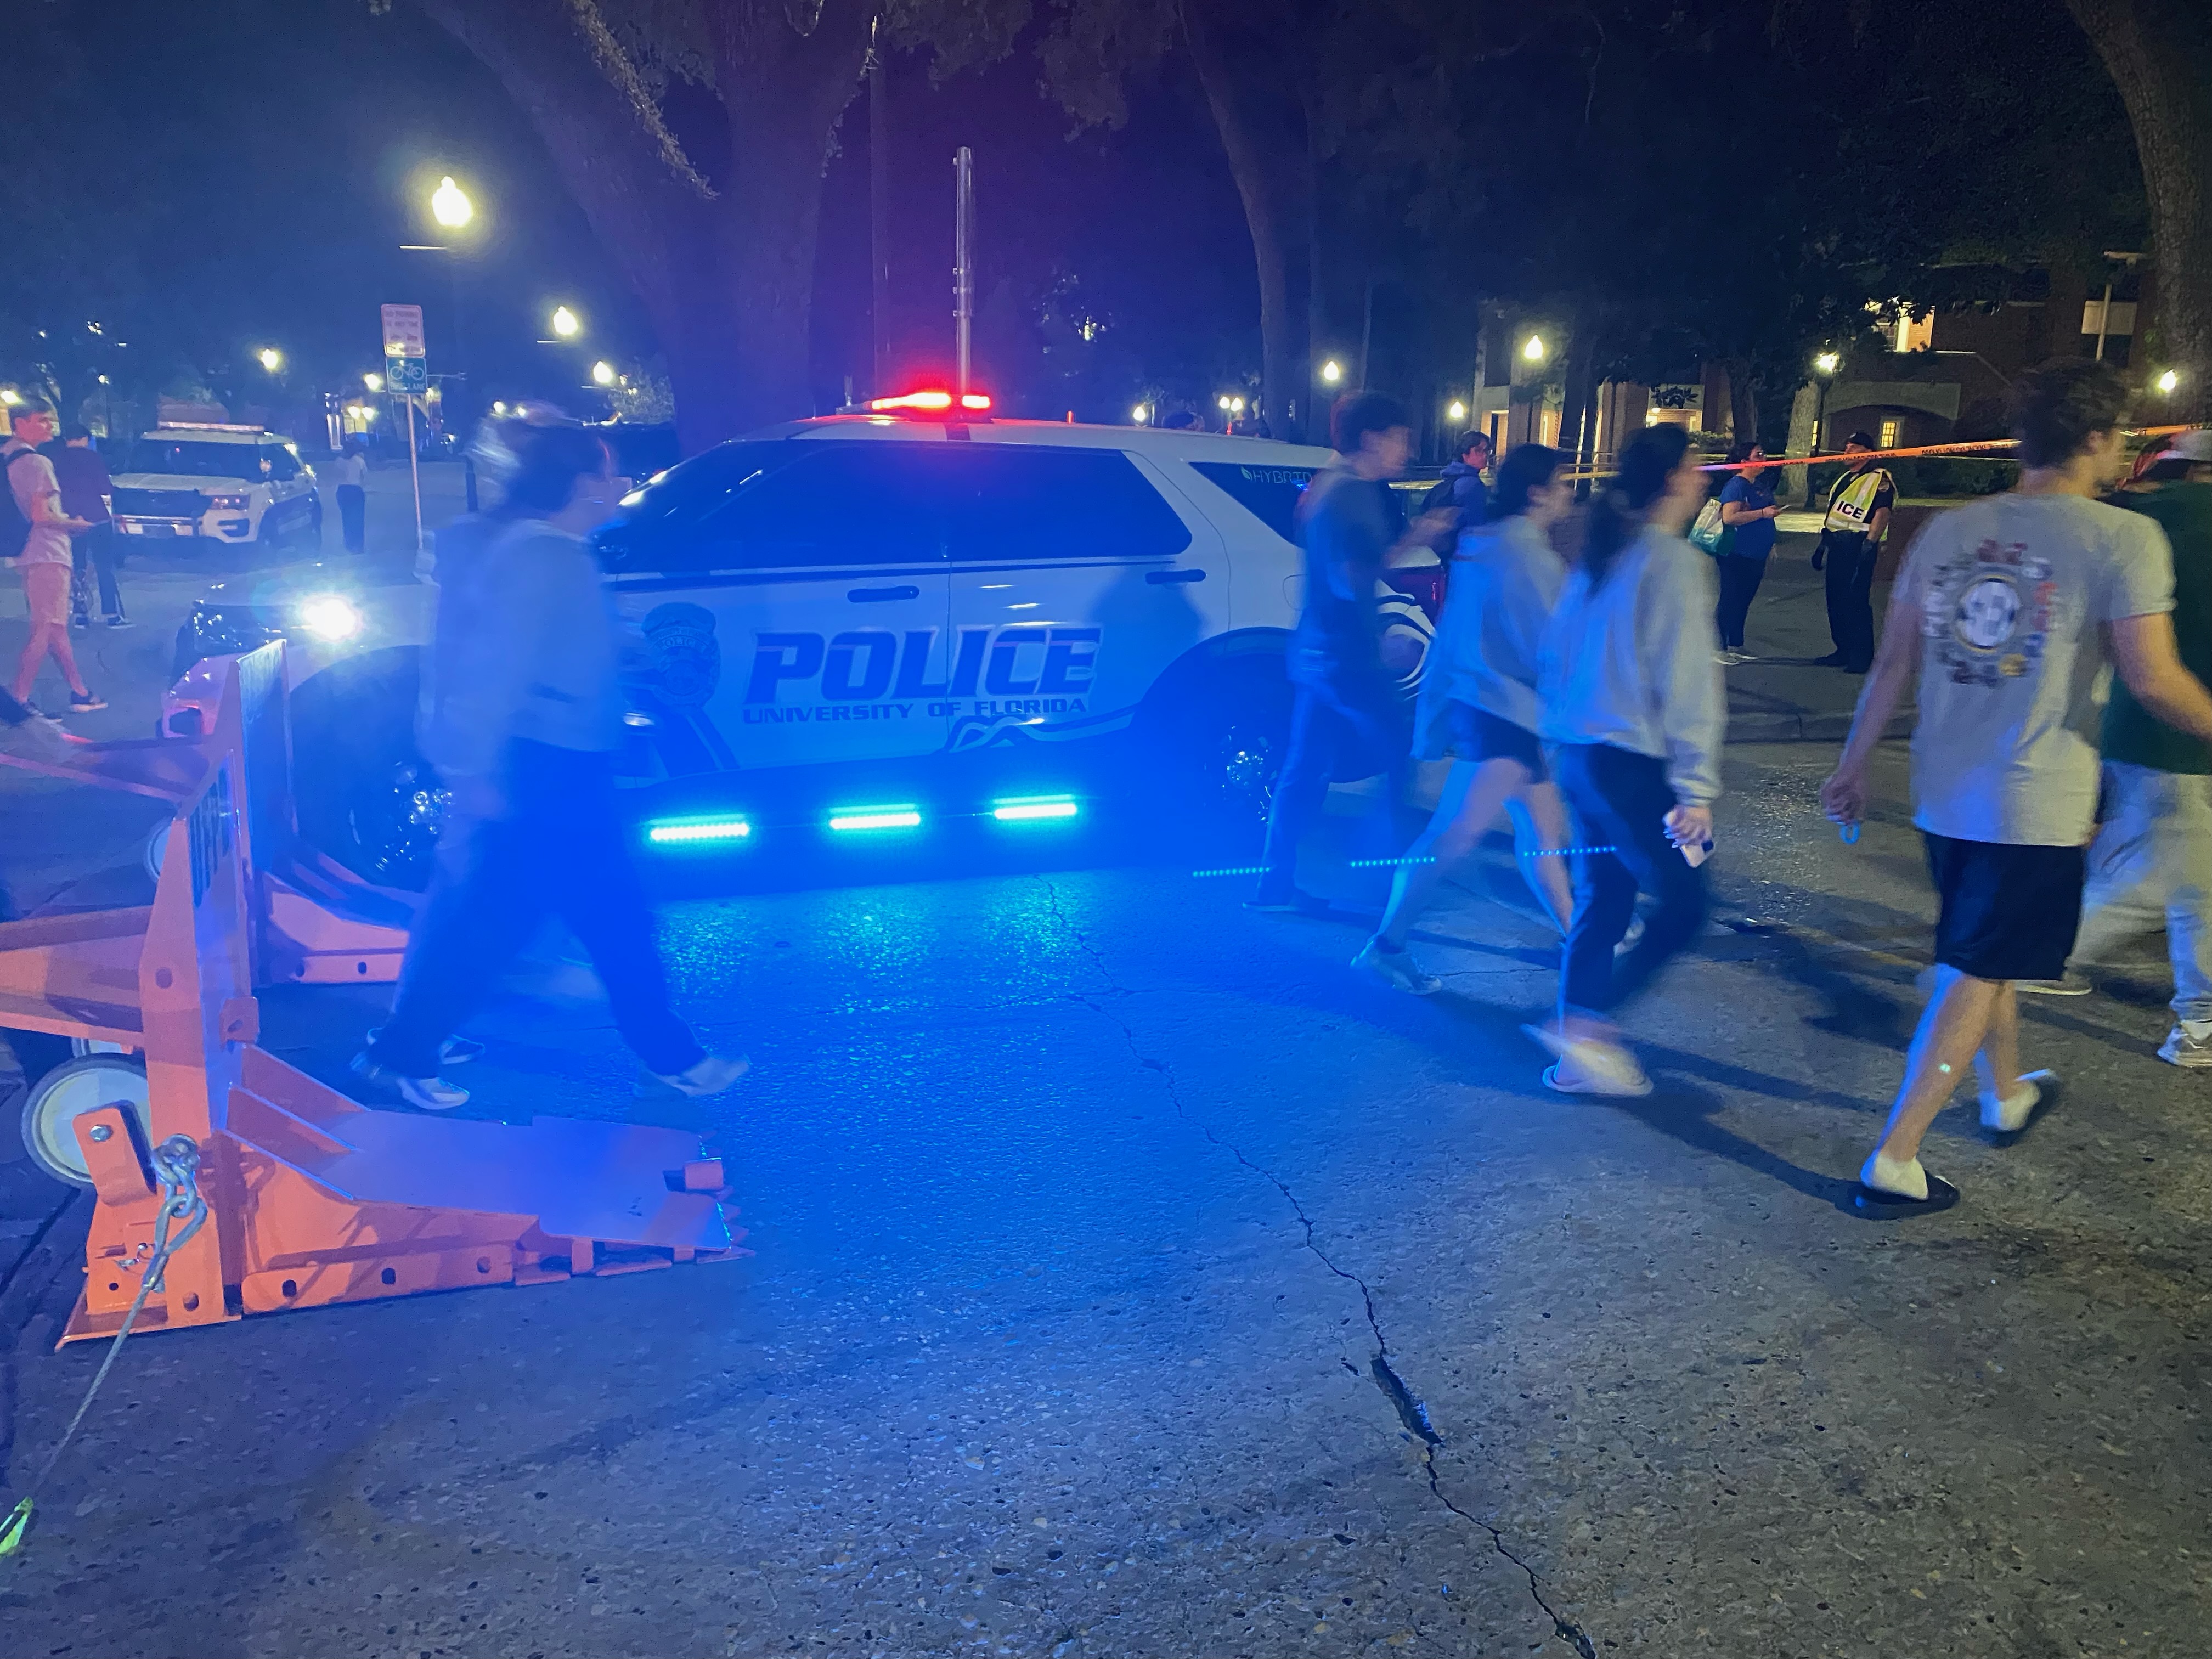 Crowd panics at UF vigil for Israel causing students to flee, 5 hurt